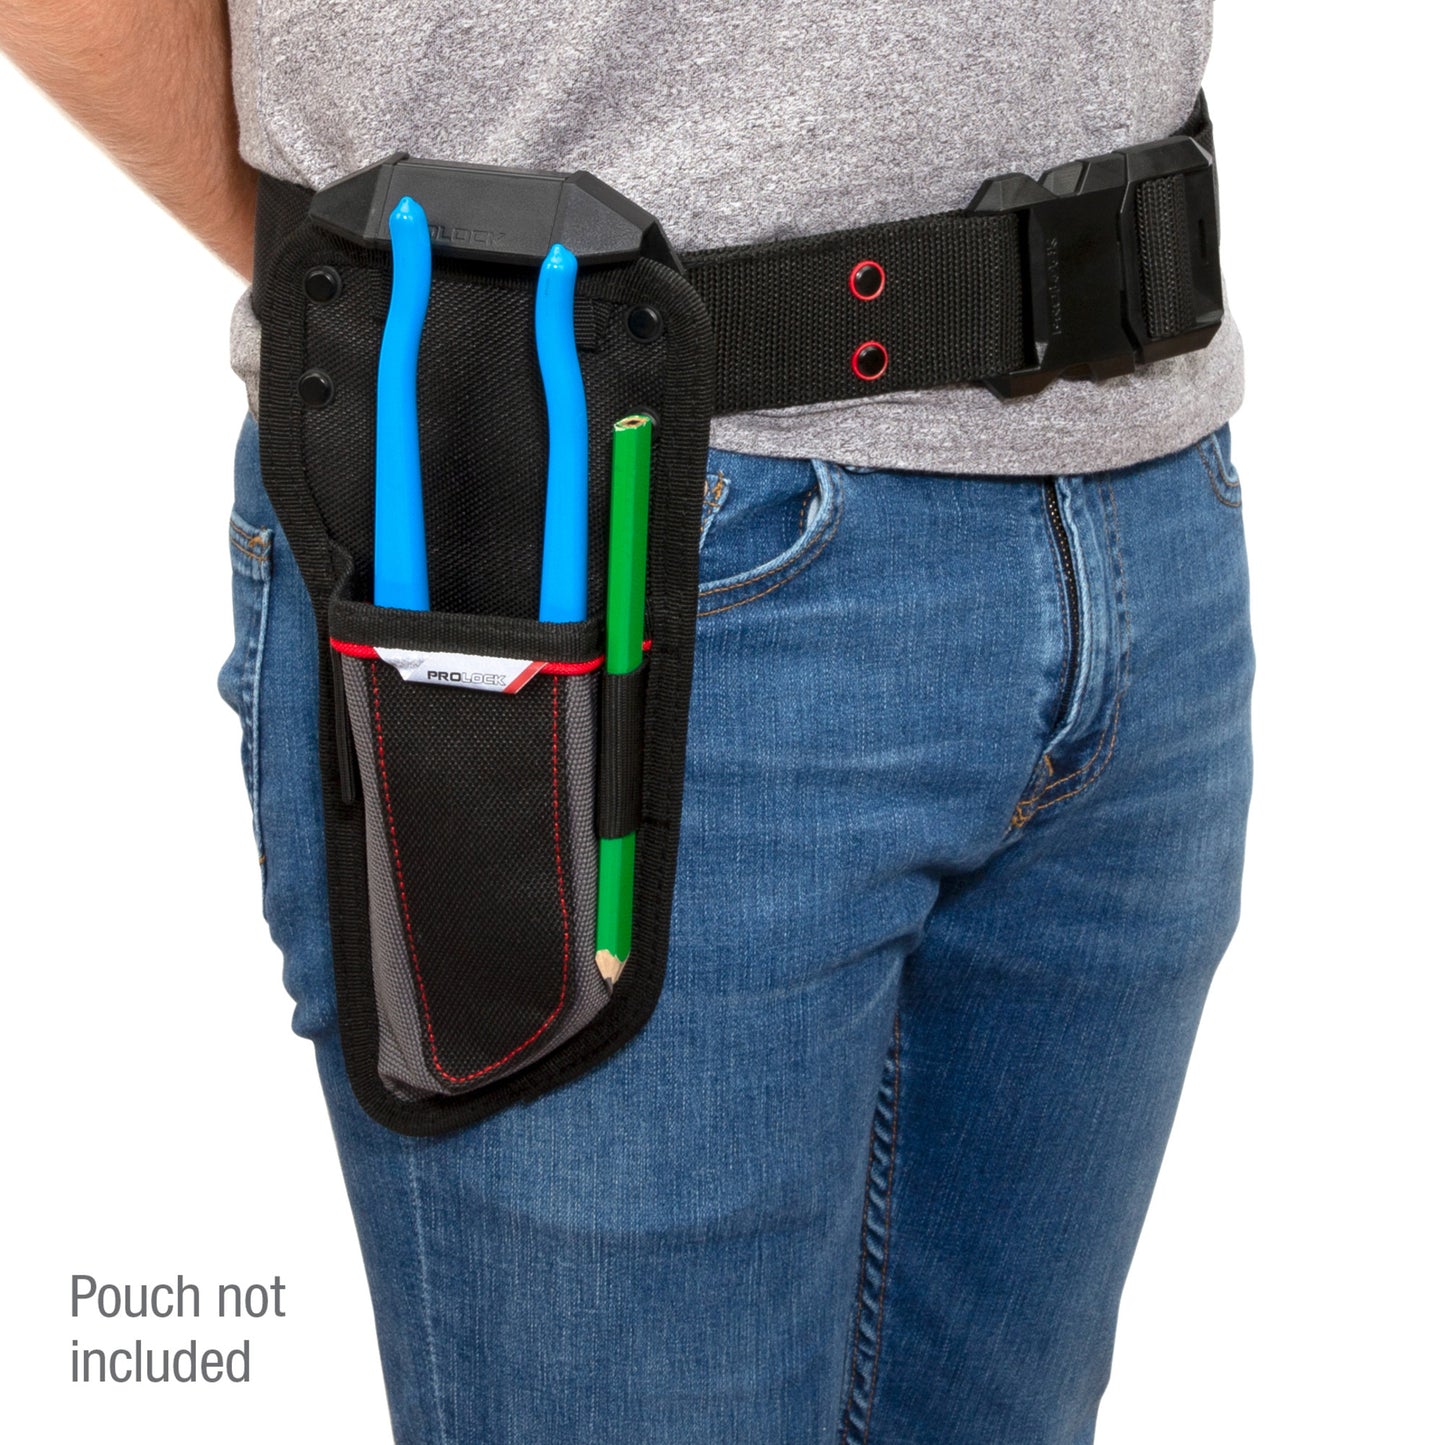 Sling Belt with Quick-Release Buckle